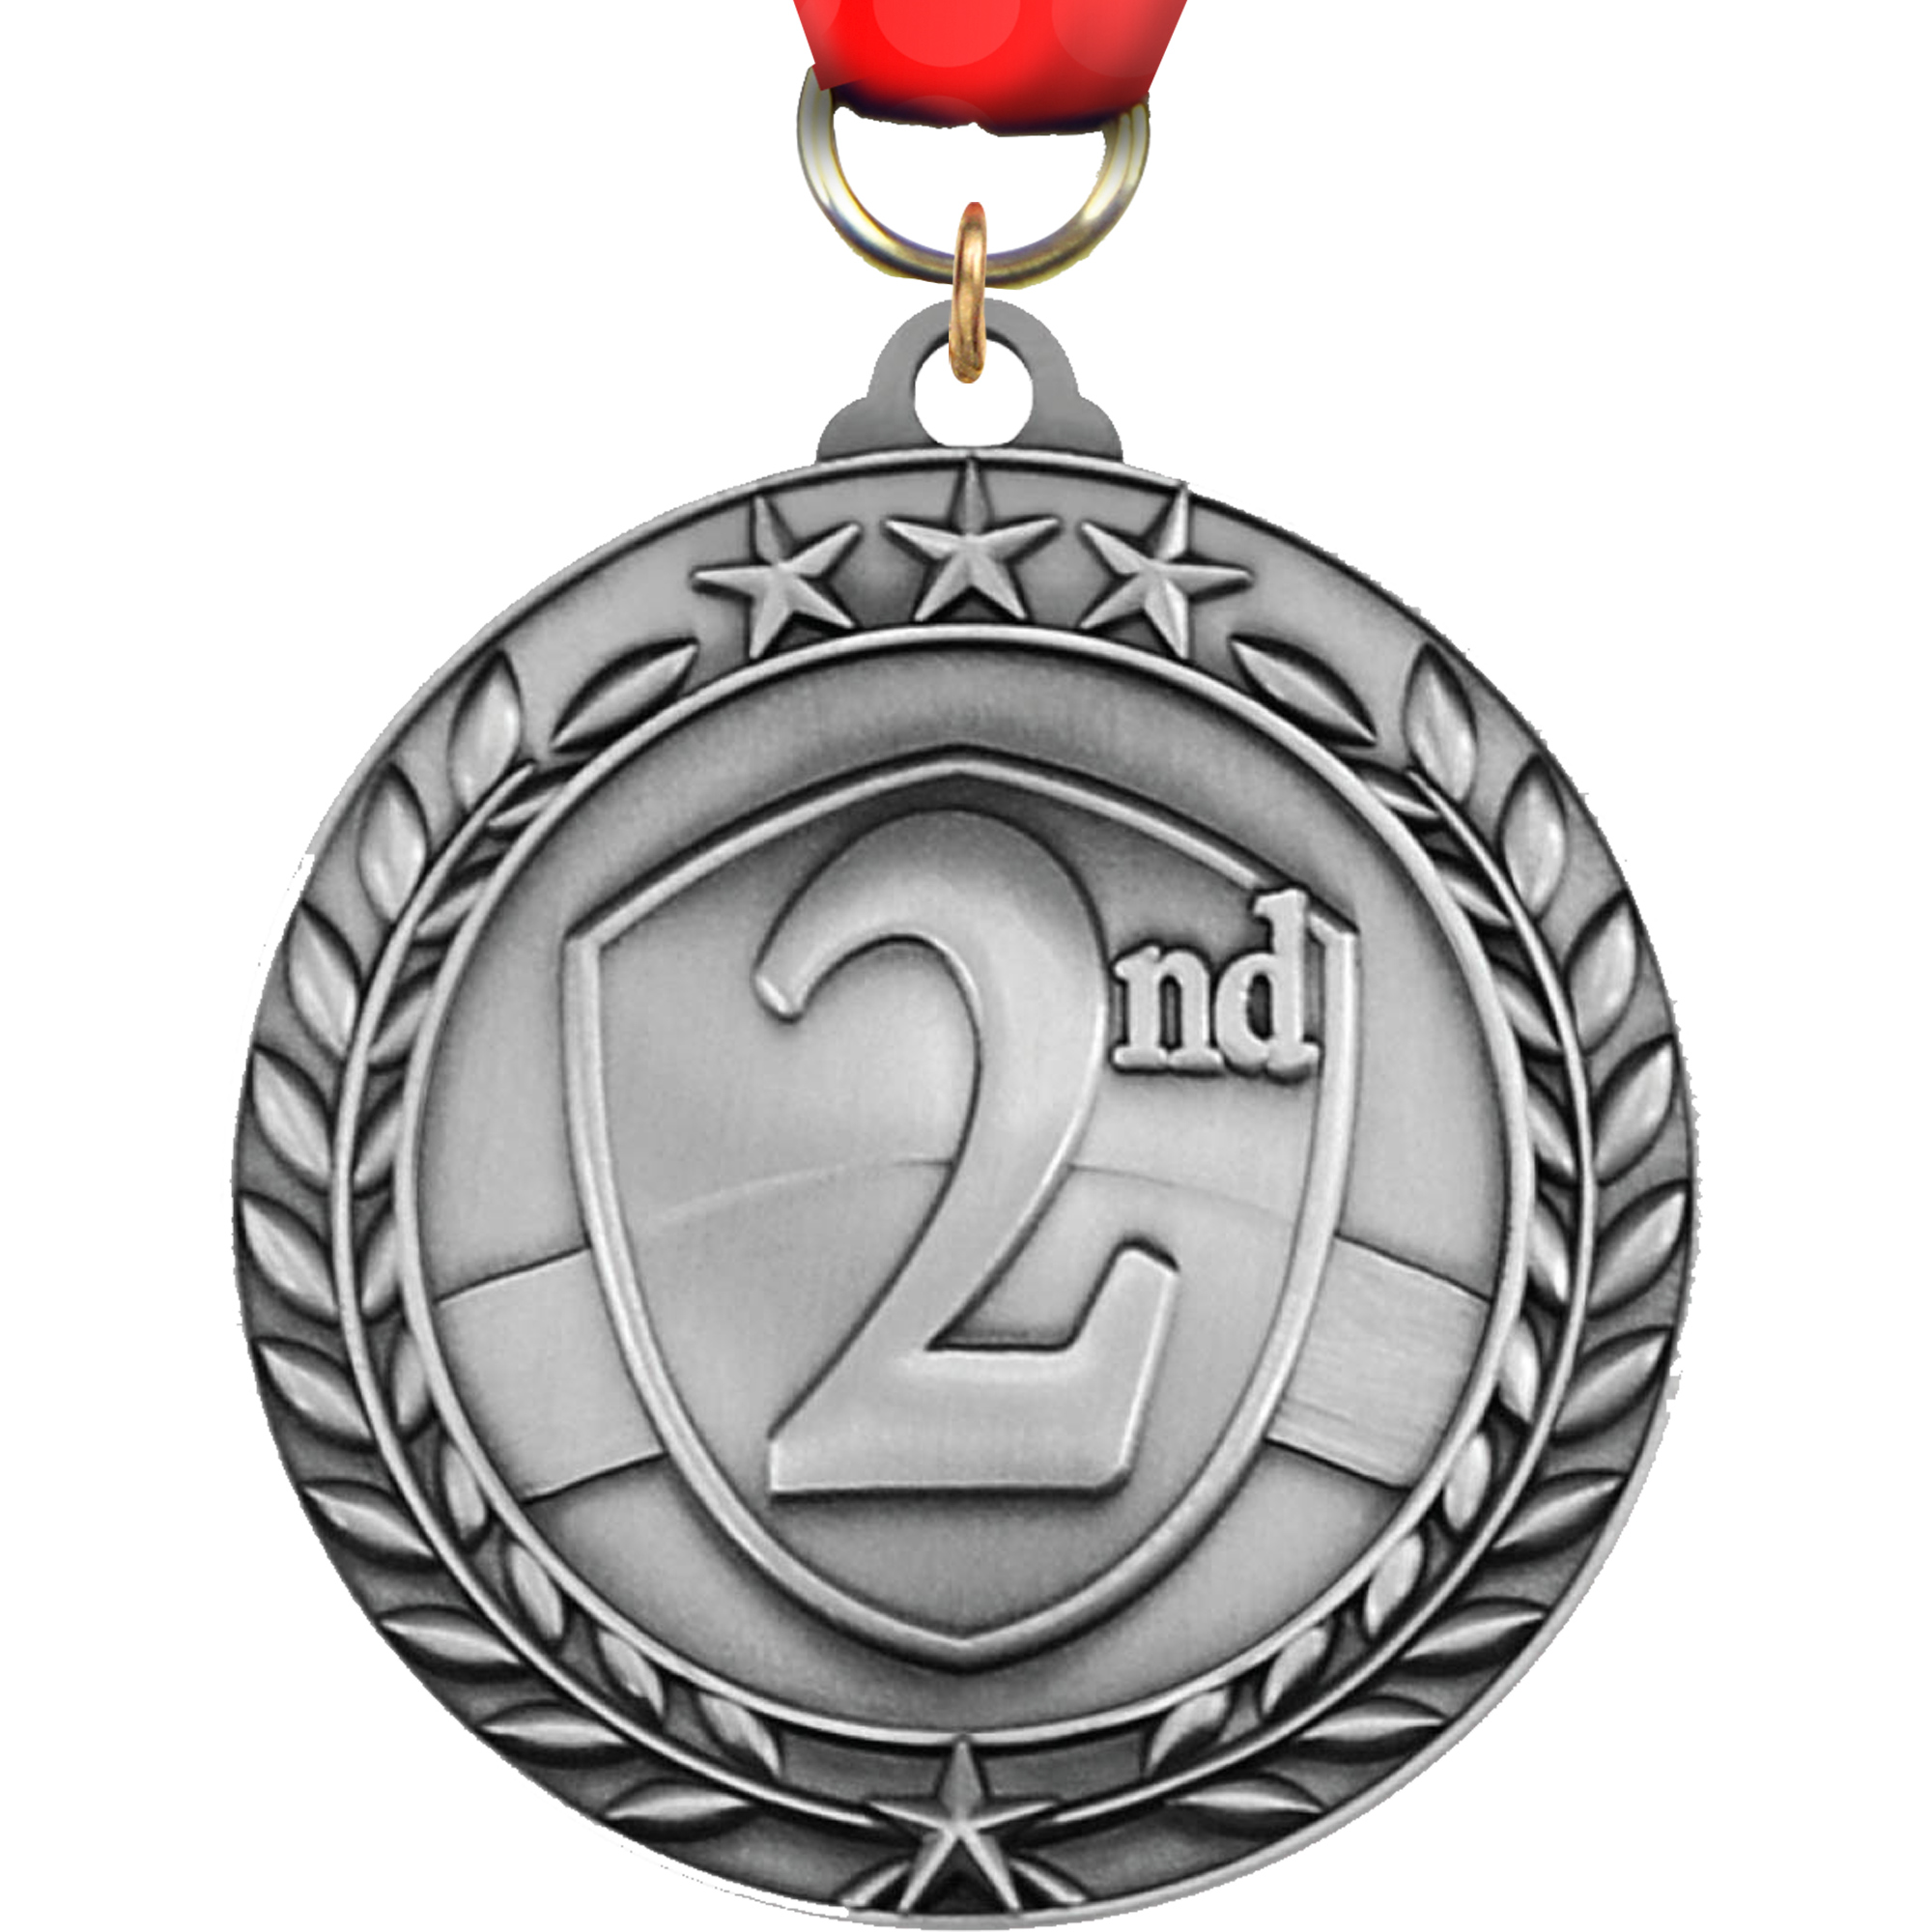 2nd 1.75 inch Dimensional Medal